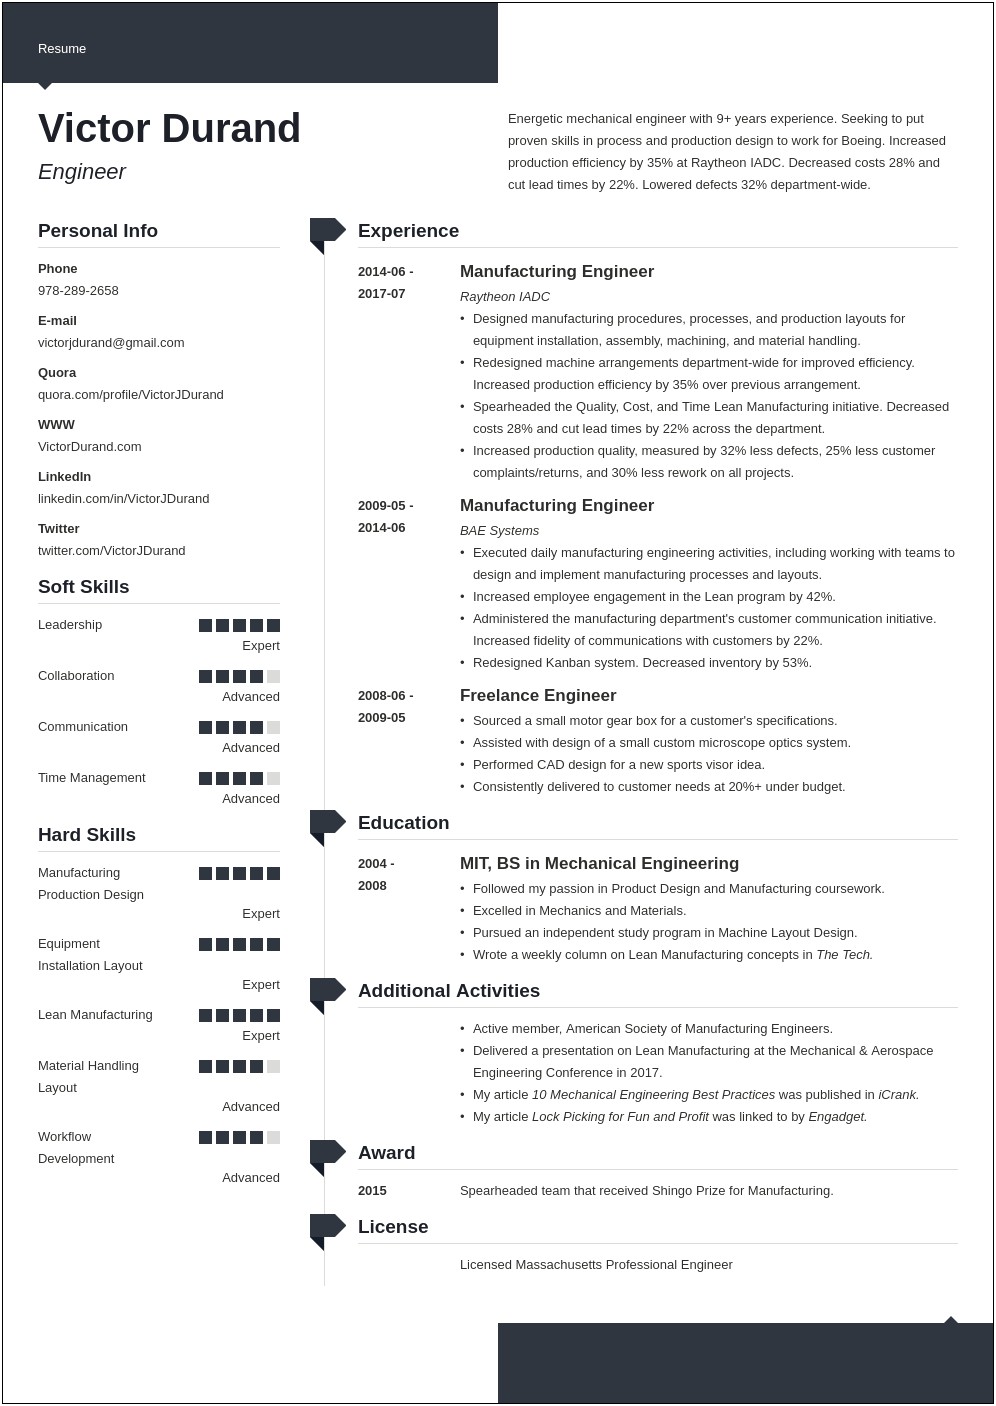 Resume Samples For Engineers Experienced